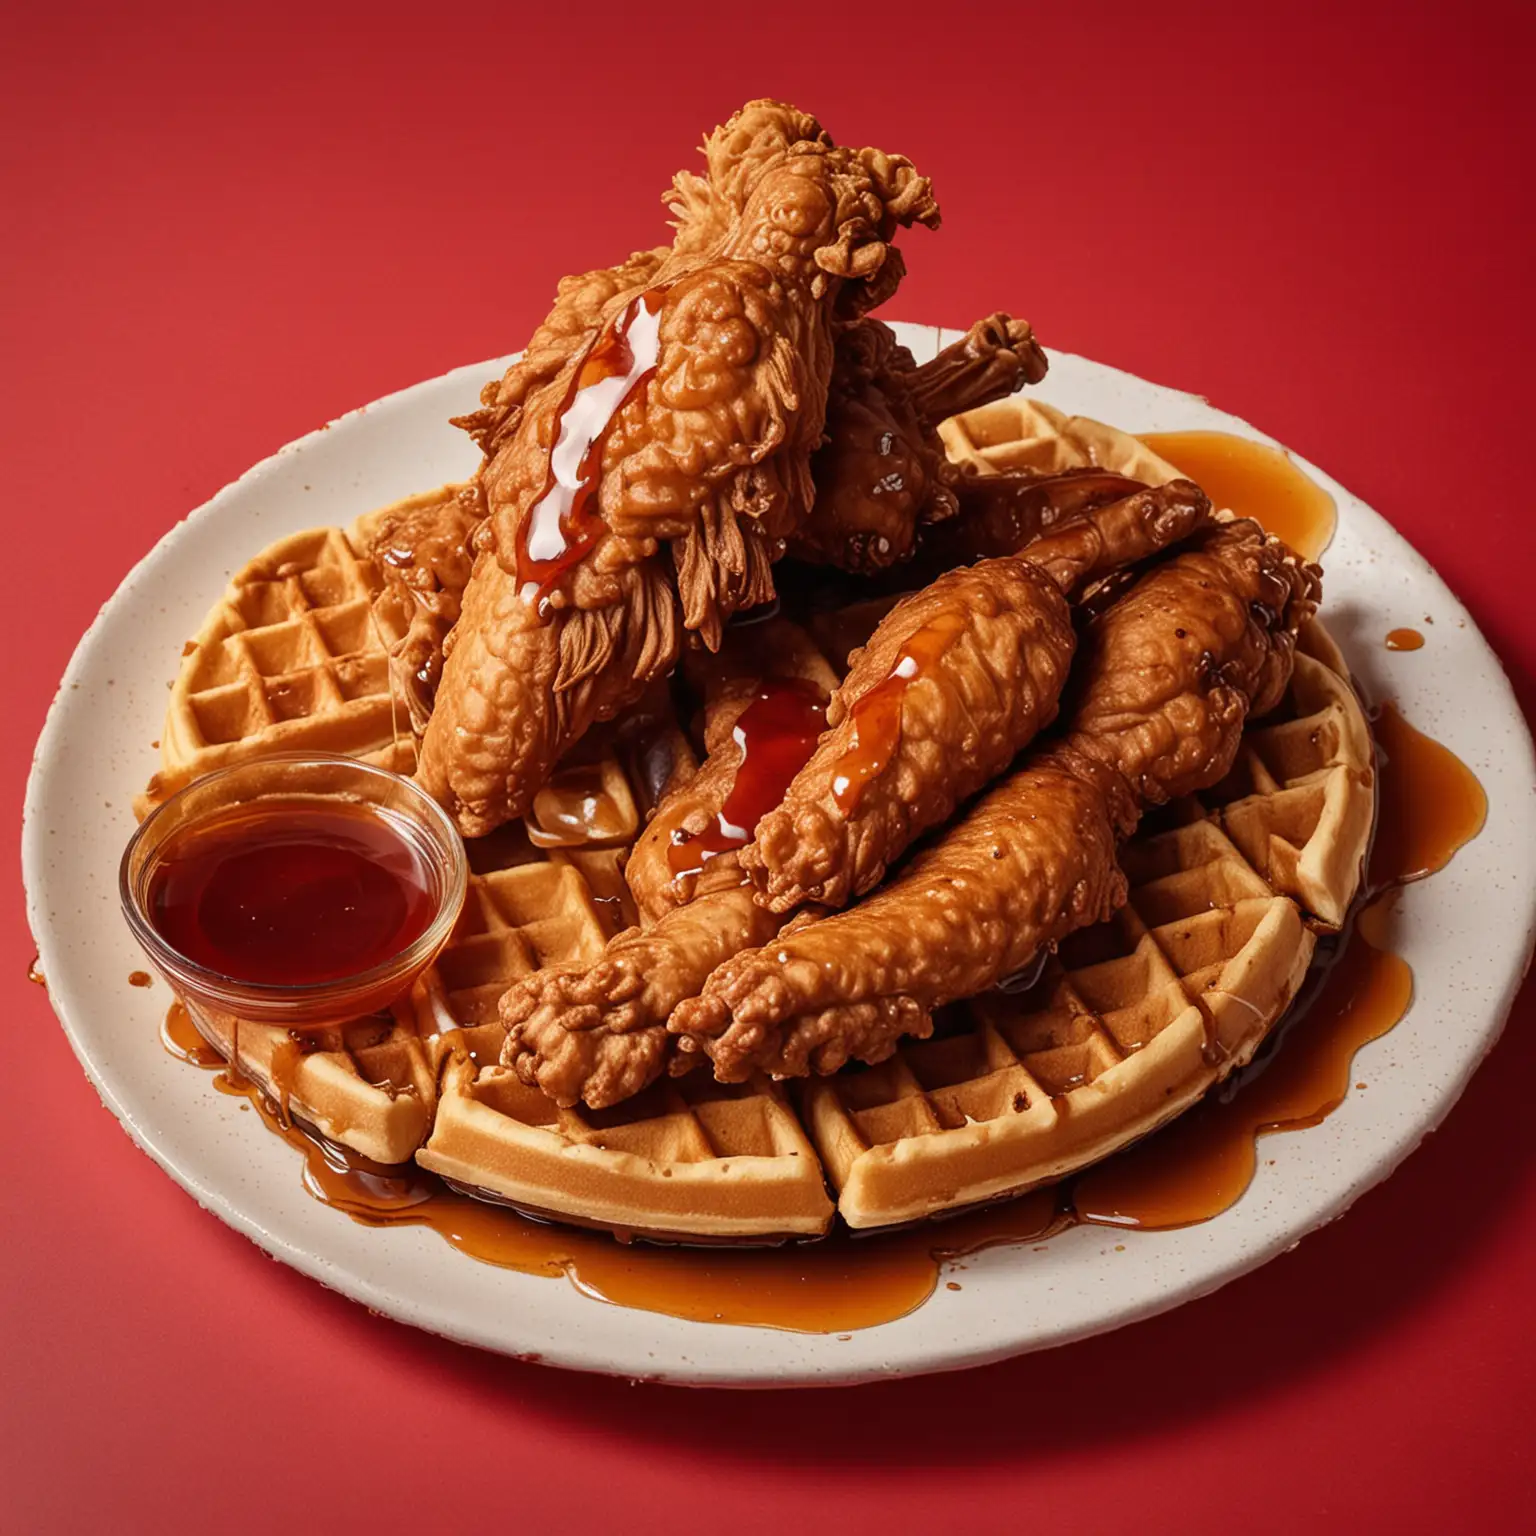 Delicious Waffles and Crispy Fried Chicken Wings with Syrup on Red Background